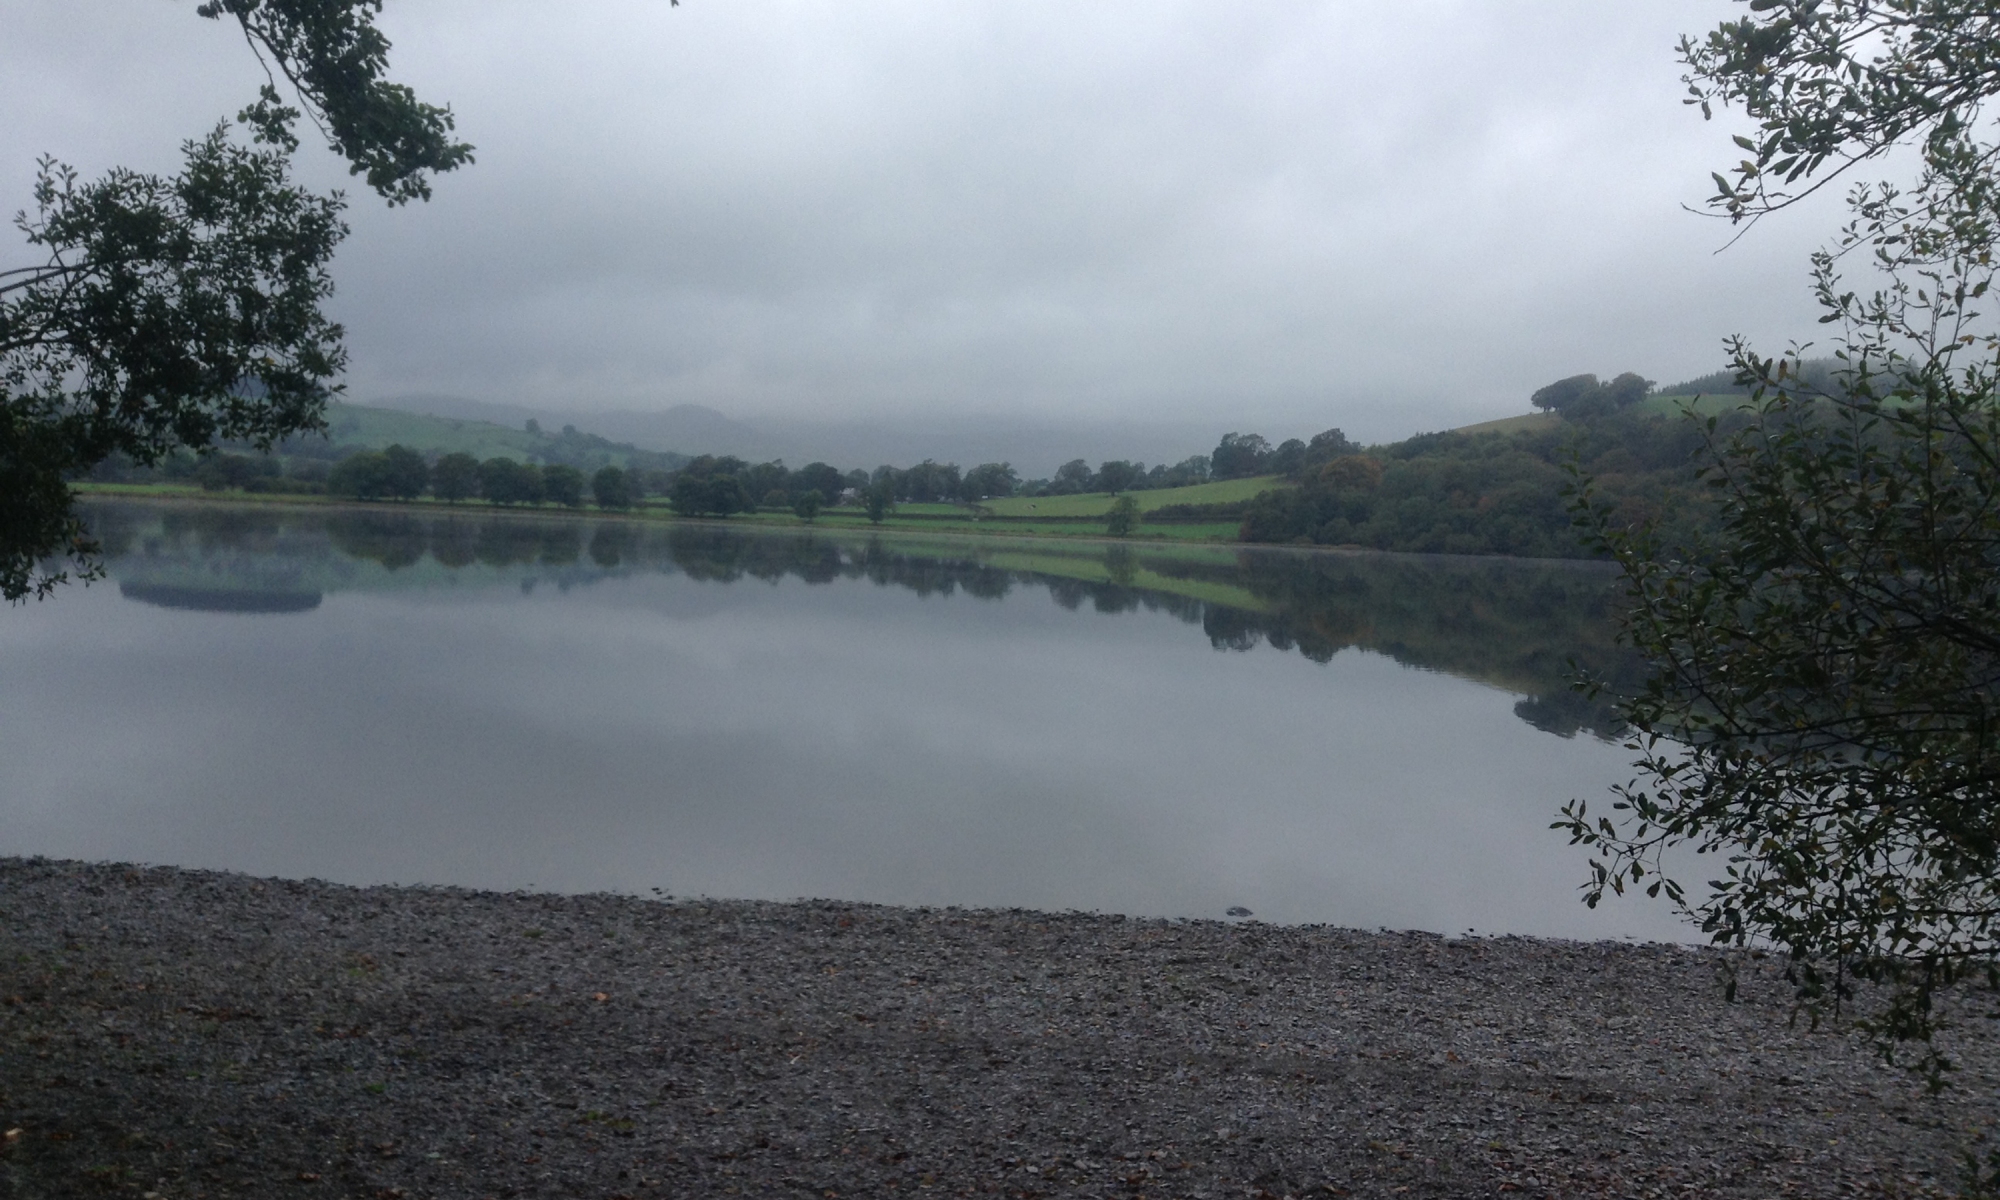 Grey sky, the green hills reflected in the still waters of the lake